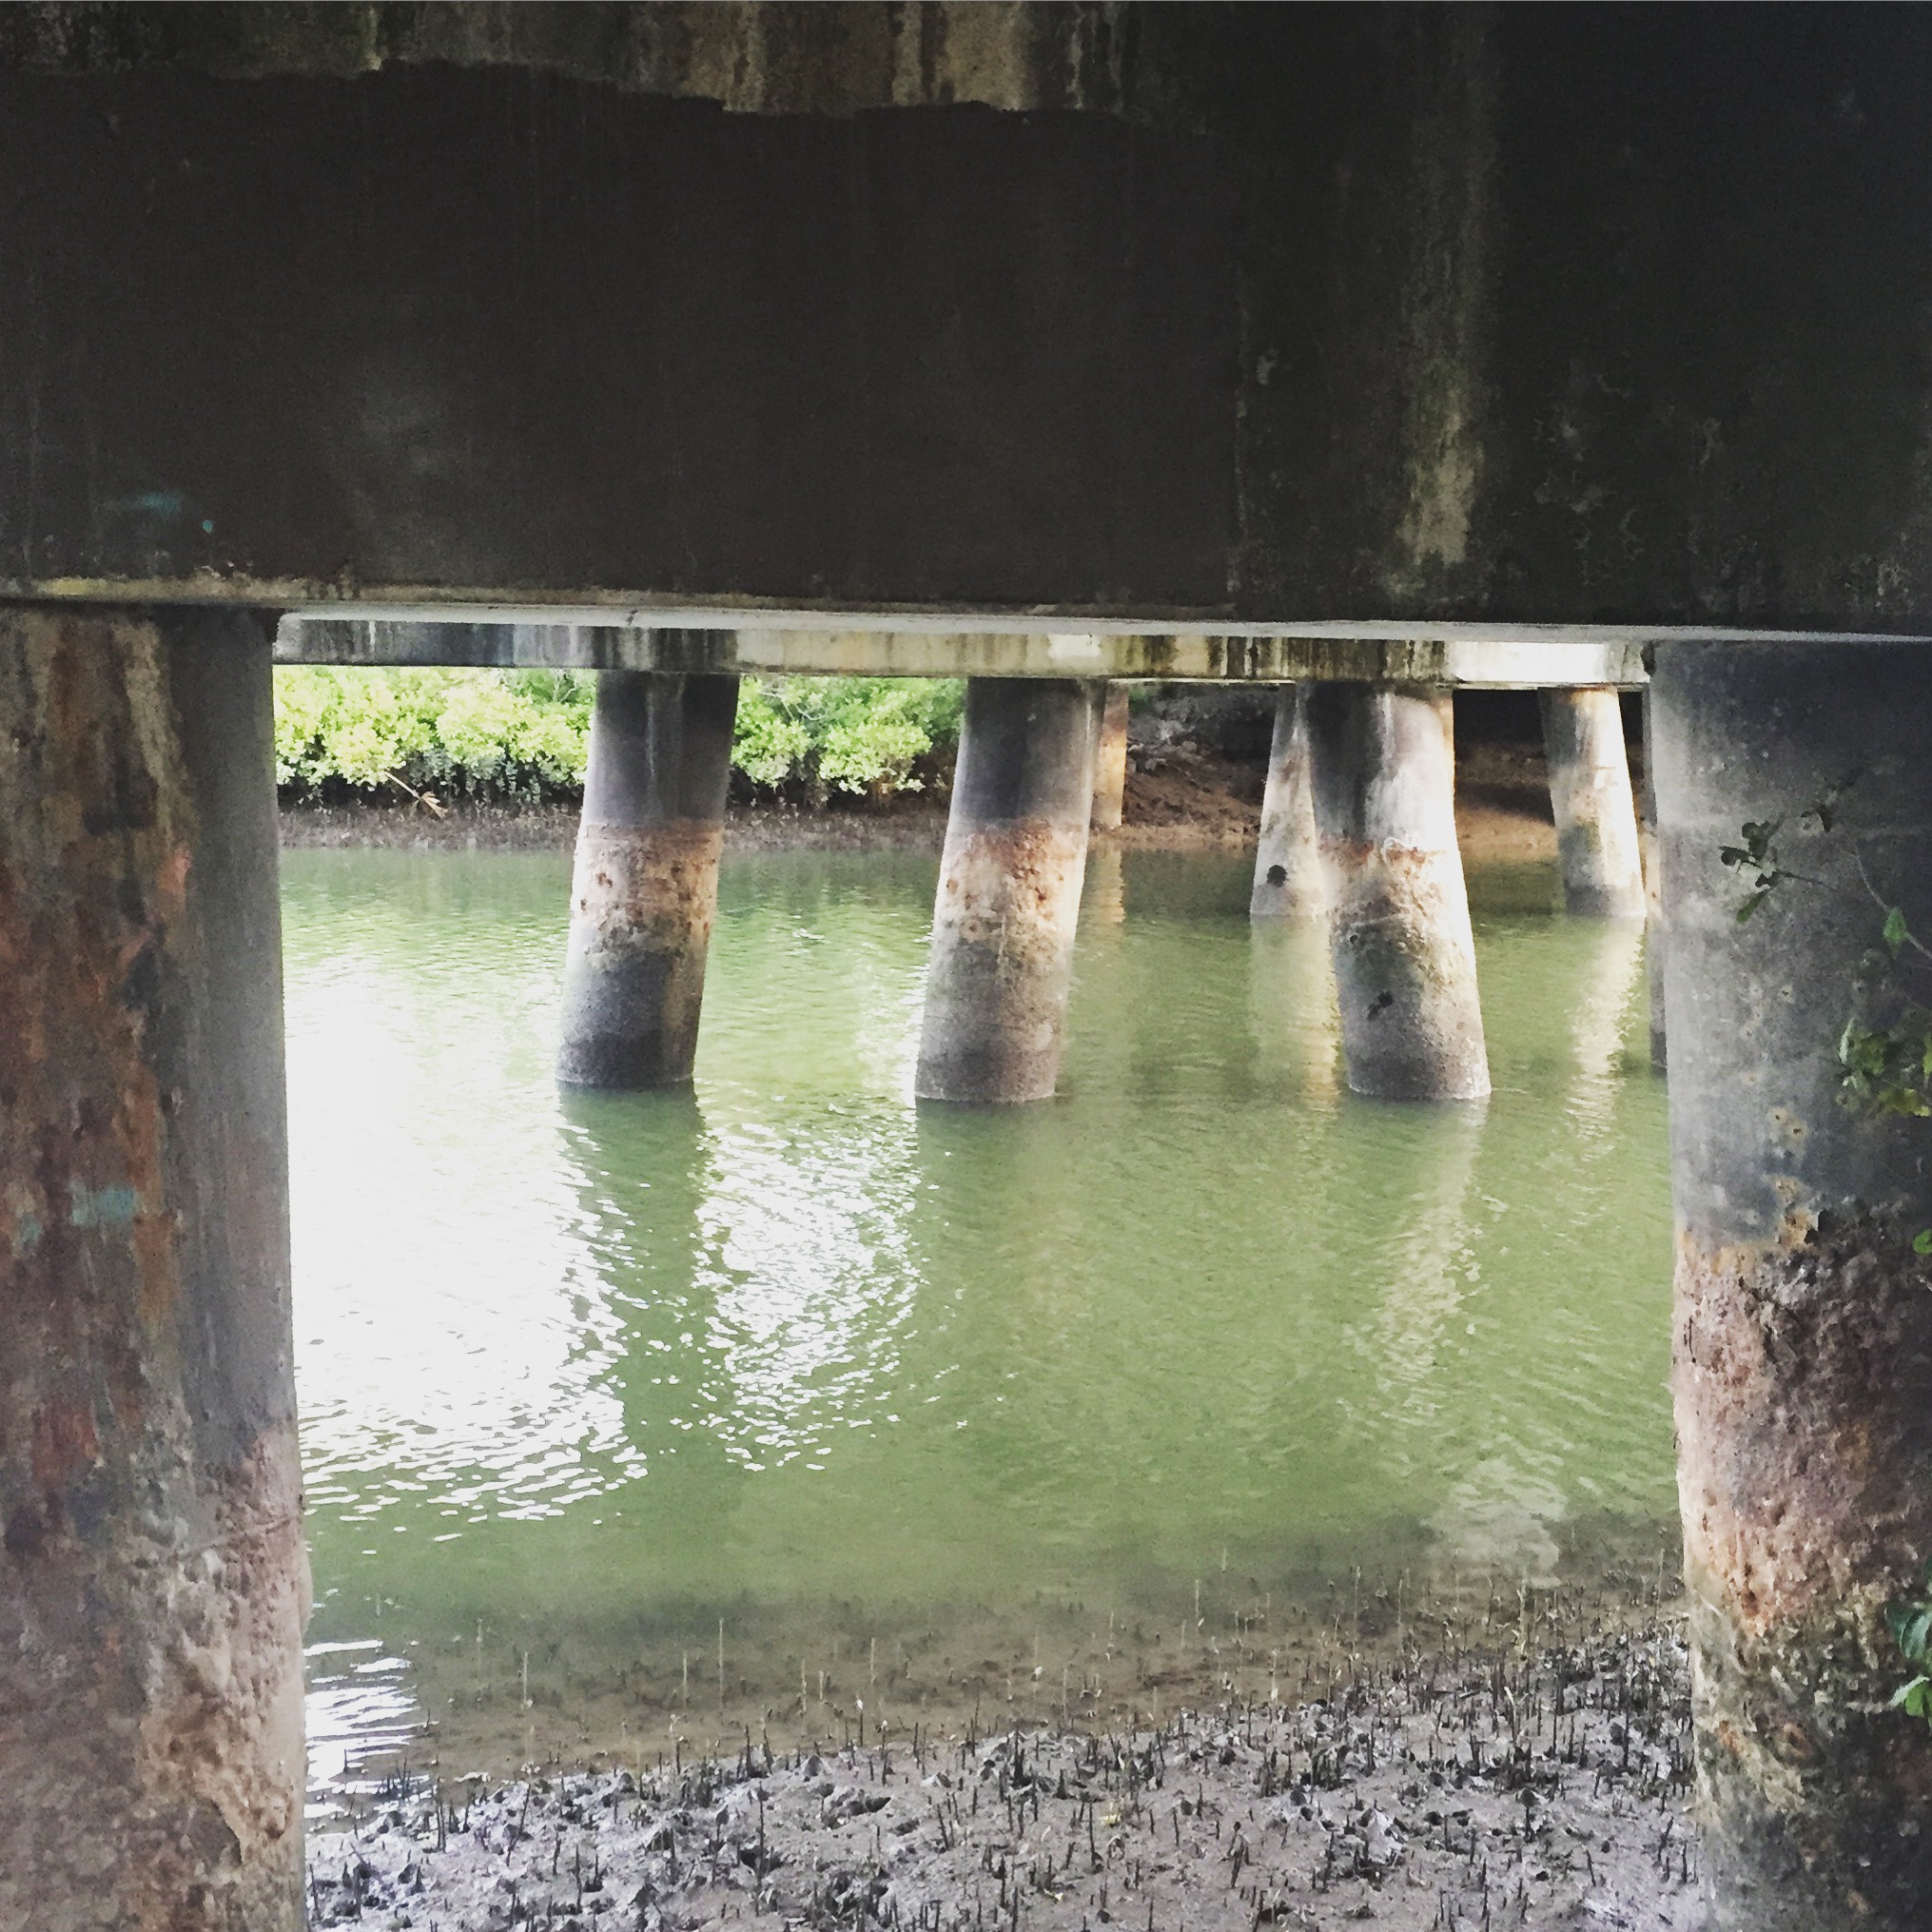 image of water under a bridge alongside a mangrove forest.